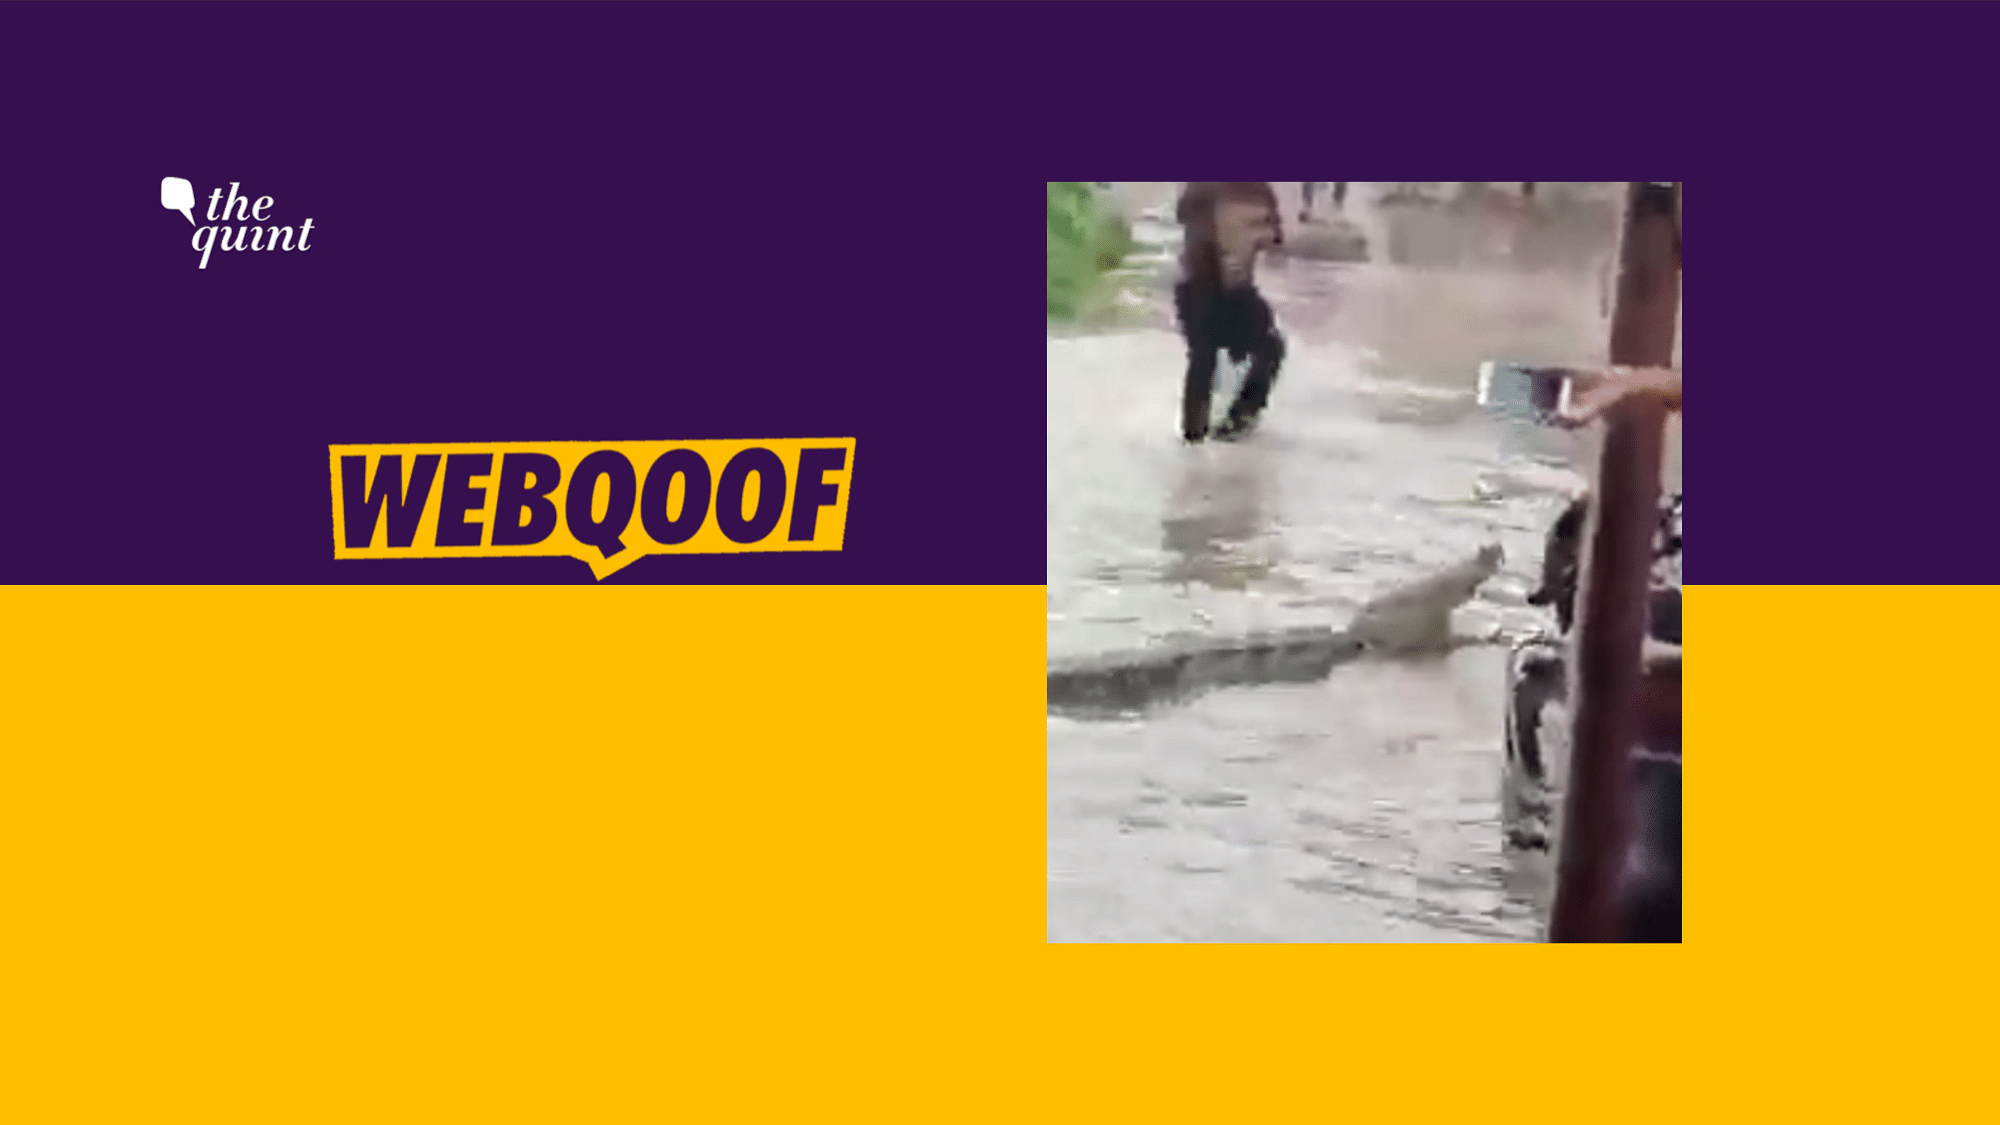 A viral video falsely claimed that a crocodile was seen on the streets of Patna.